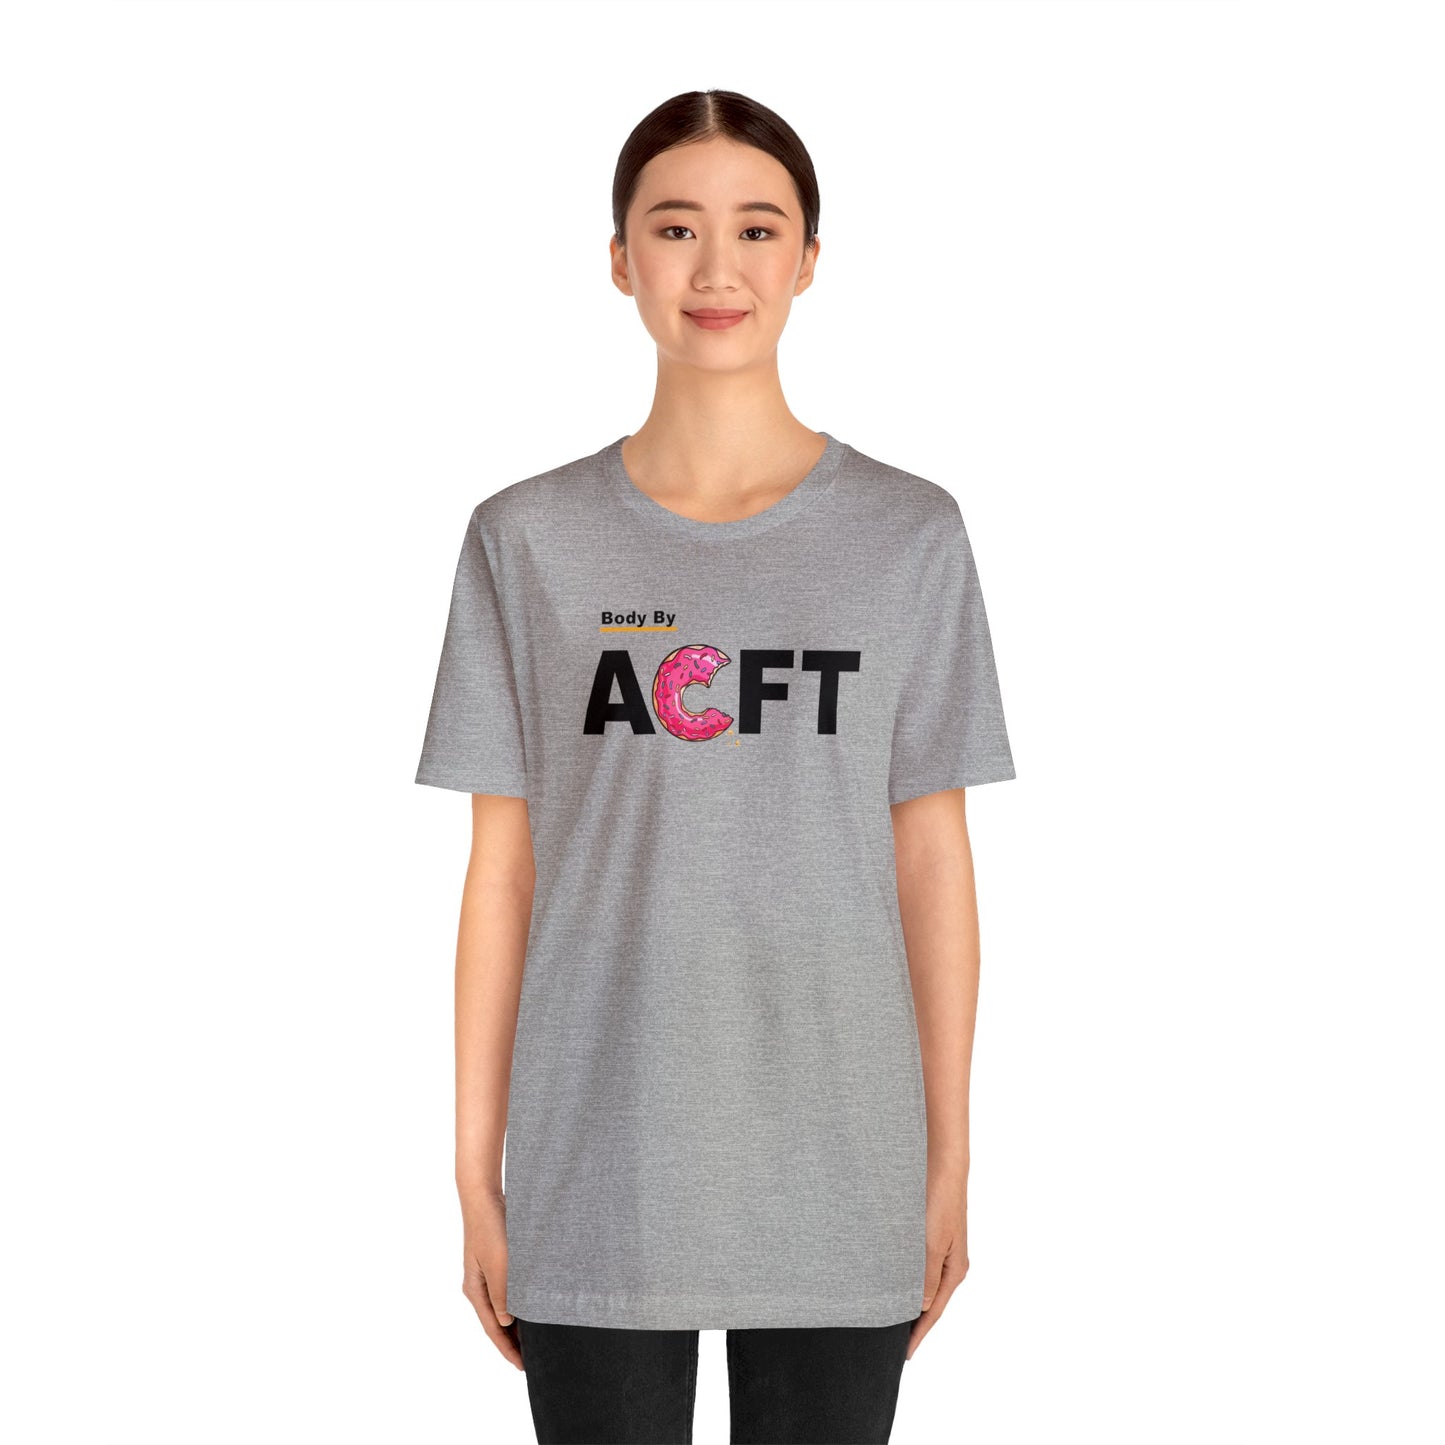 Body By ACFT - Shirt